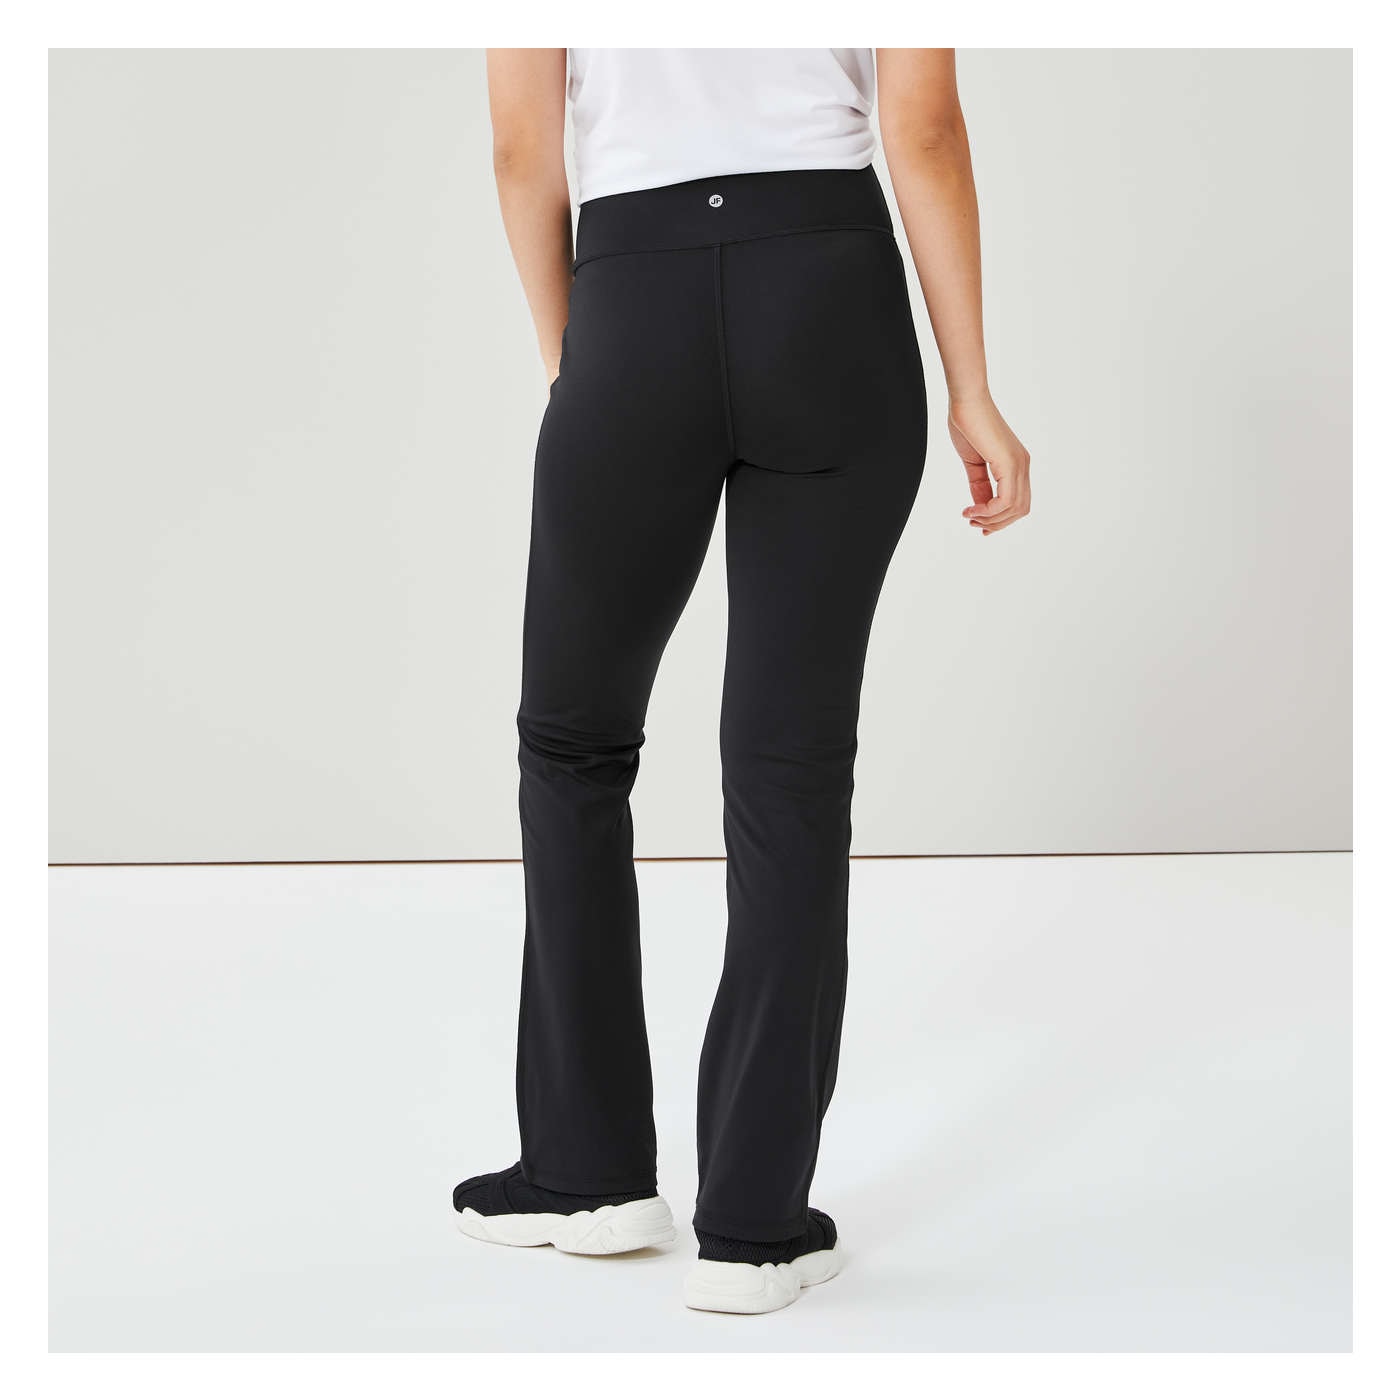 Women's Black Solid Polyester Yoga Pants